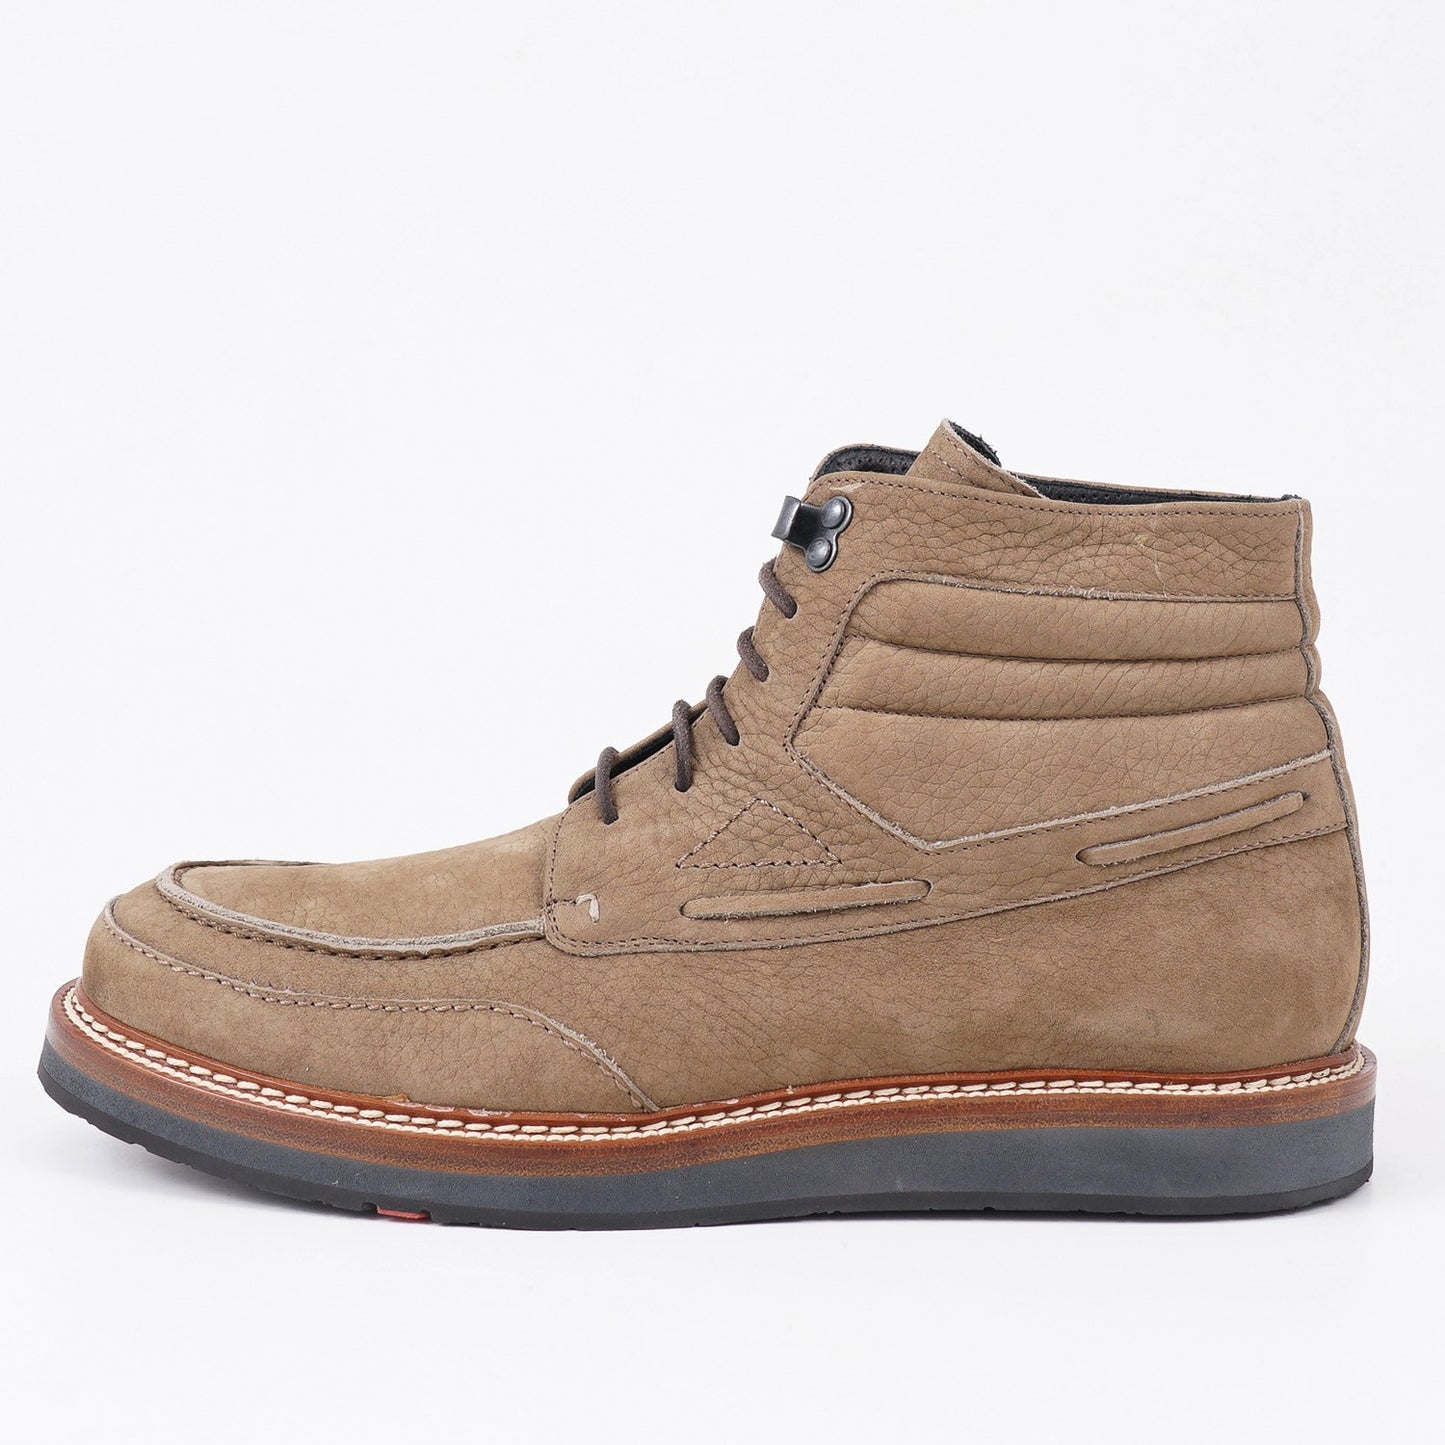 Kiton Storm-Welted Casual Boots - Top Shelf Apparel